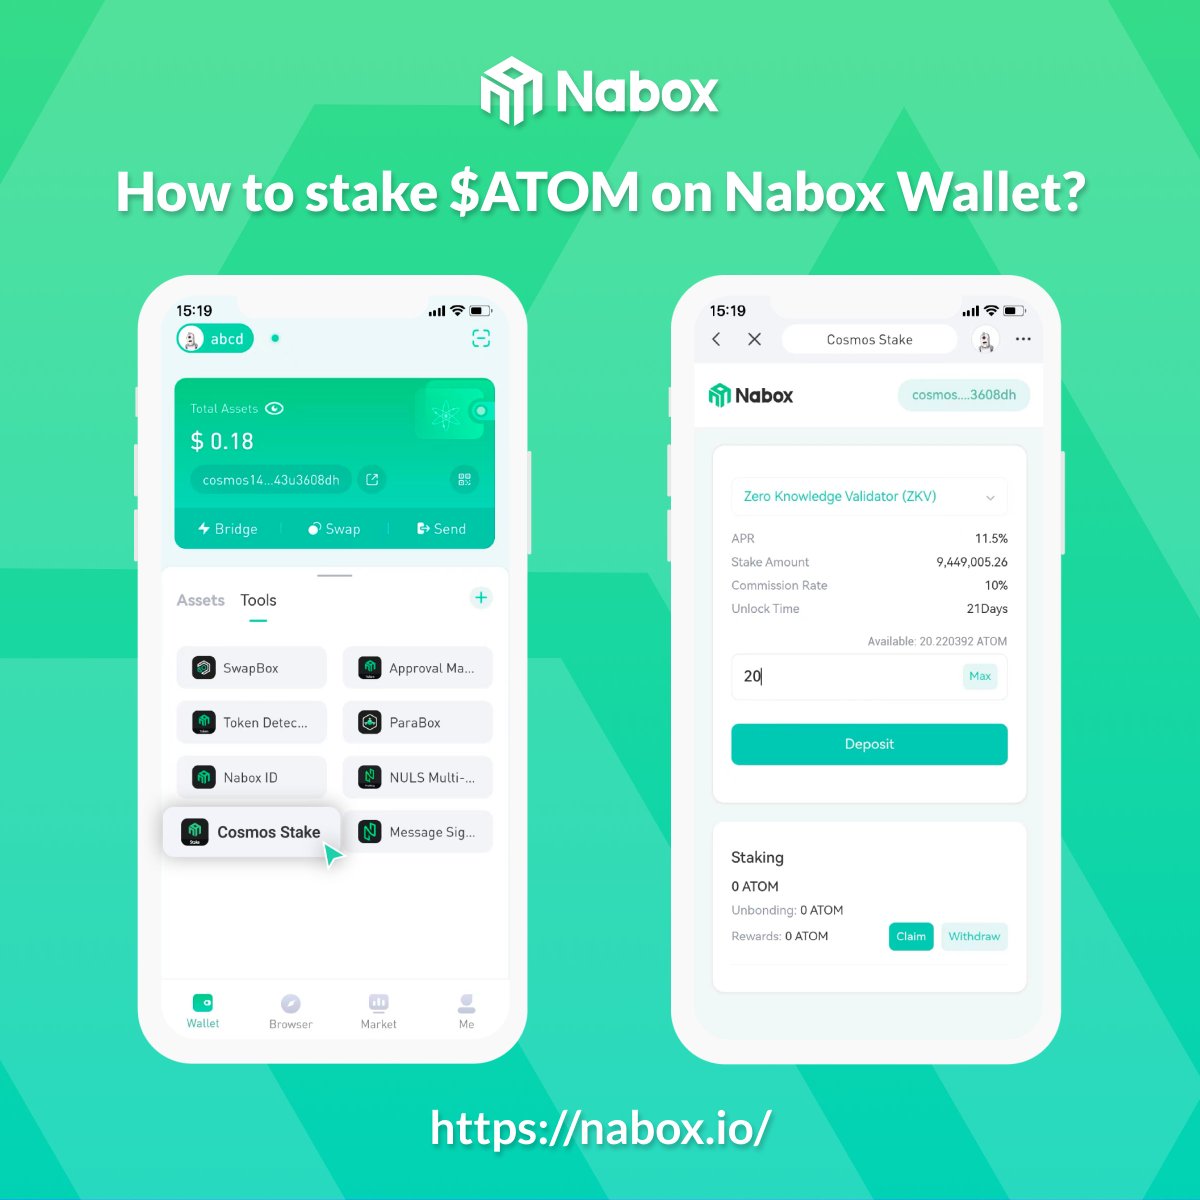 🧐 How to stake your $ATOM on #Naboxwallet? 👉 View the guide 1. Switch the network to Cosmos @cosmos 2. Click 'Tools' 3. Enter 'Cosmos Stake' DApp 4. Choose a node you prefer to stake 5. Input the amount, then click 'Deposit' #ATOM #Stake #Cosmos #Nabox